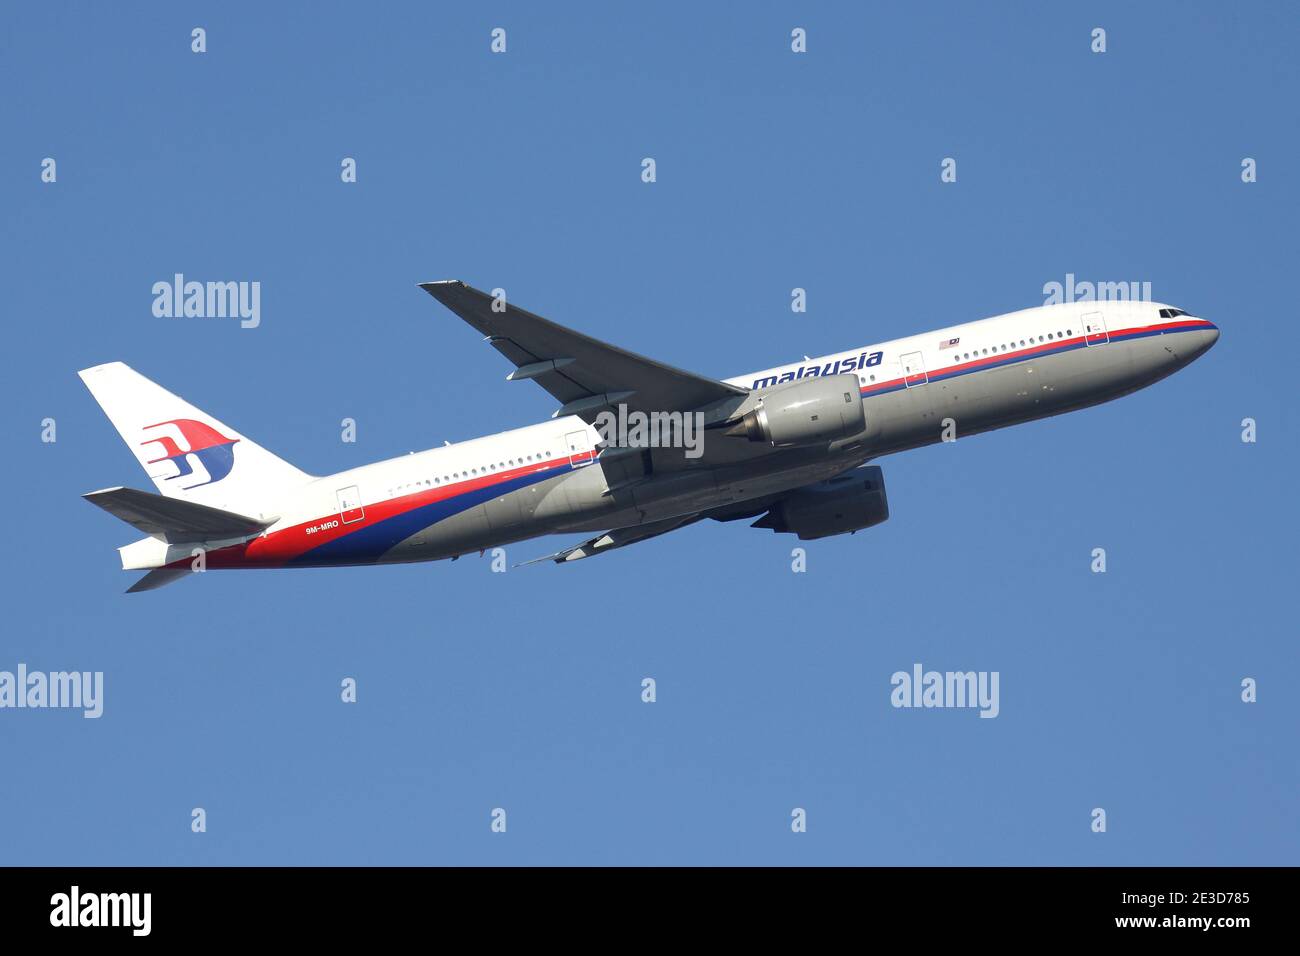 Malaysia Airlines Boeing 777-200 with registration 9M-MRO airborne at Frankfurt Airport. This aircraft disappeared on flight MH370 on 8 March 2014. Stock Photo